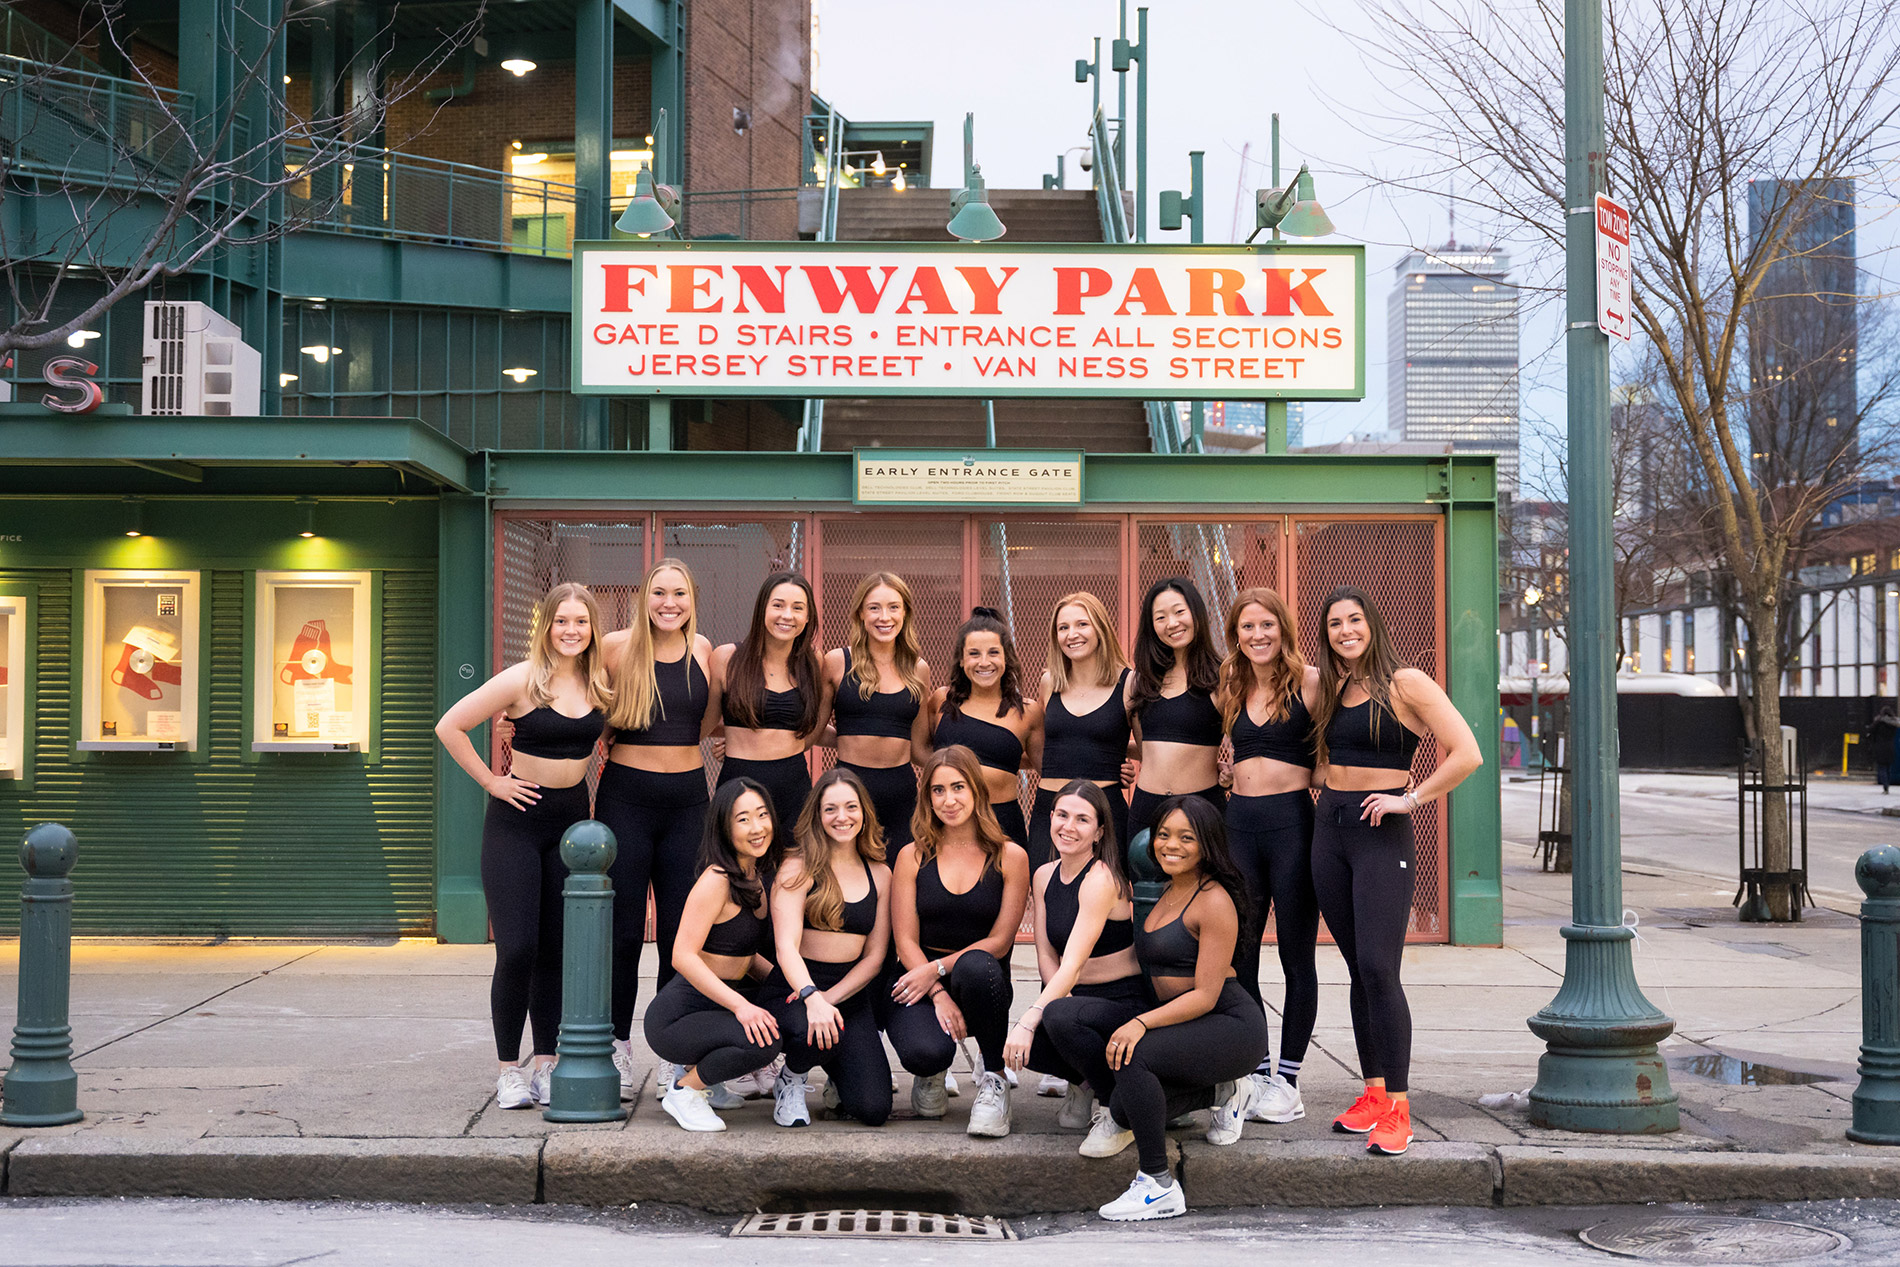 The staff from solidcore fitness studio pose for a group photo outside of Fenway Park baseball stadium in Boston.